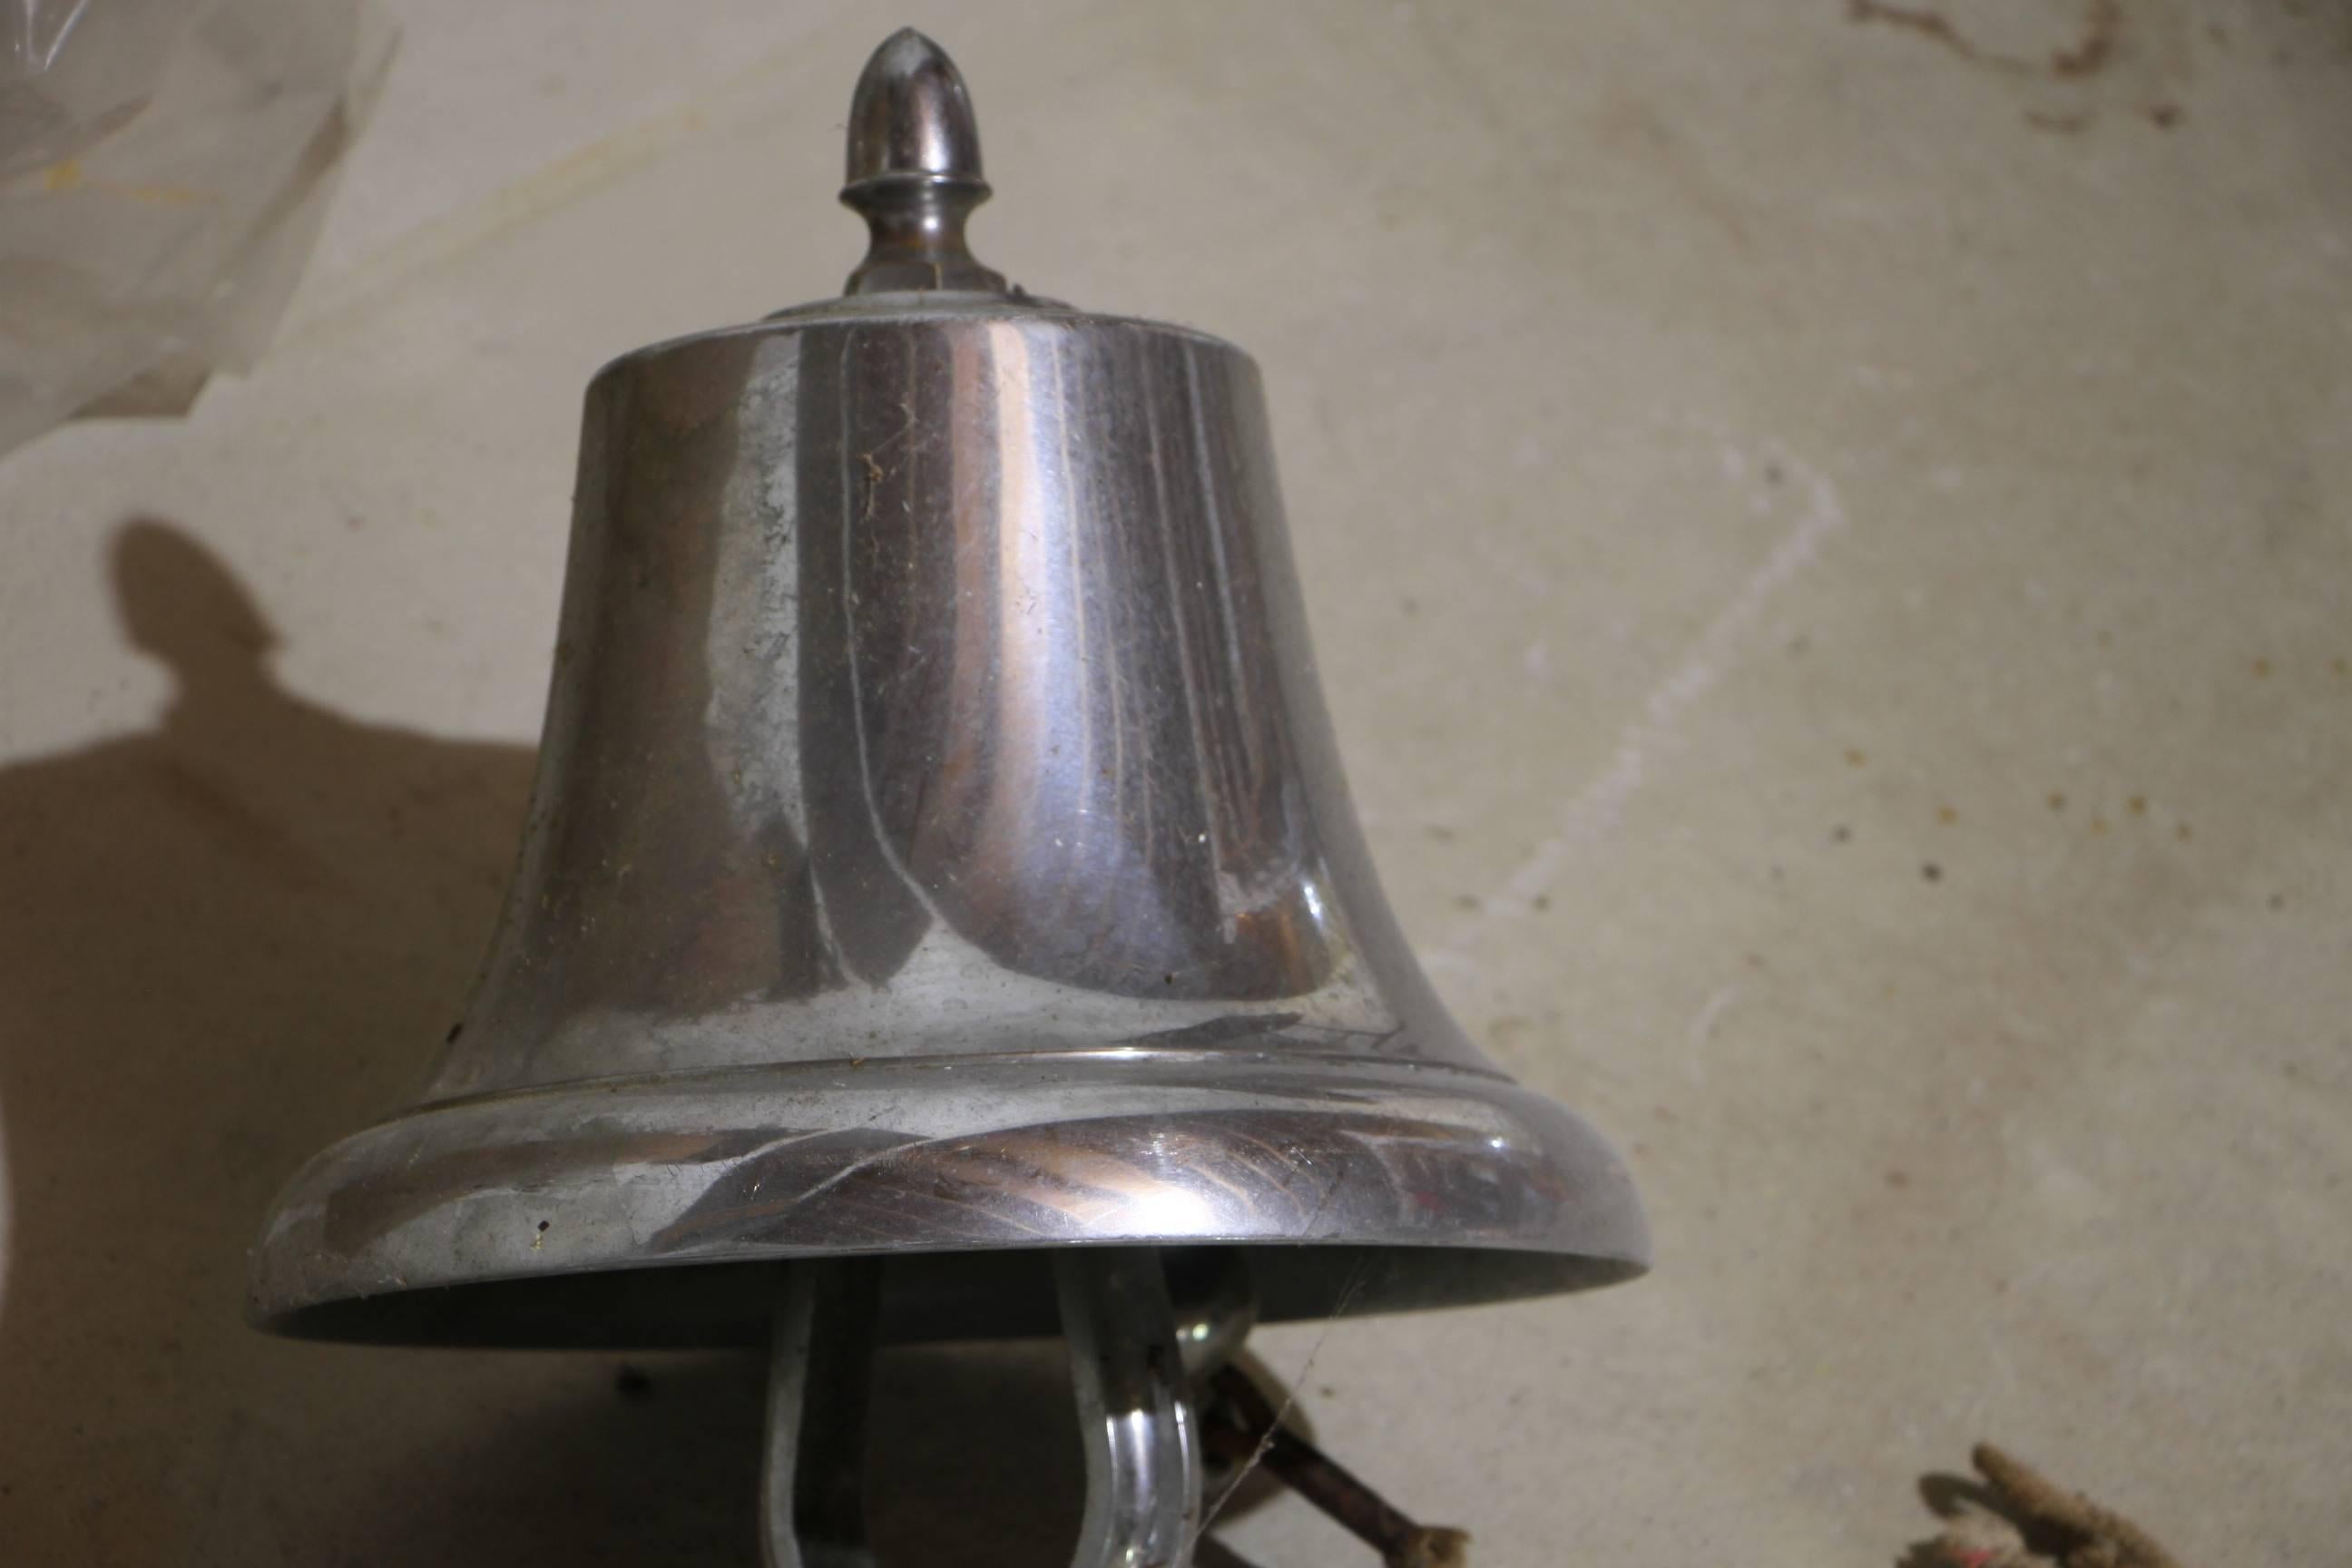 Authentic Industrial style fire truck bell in all original very good condition.